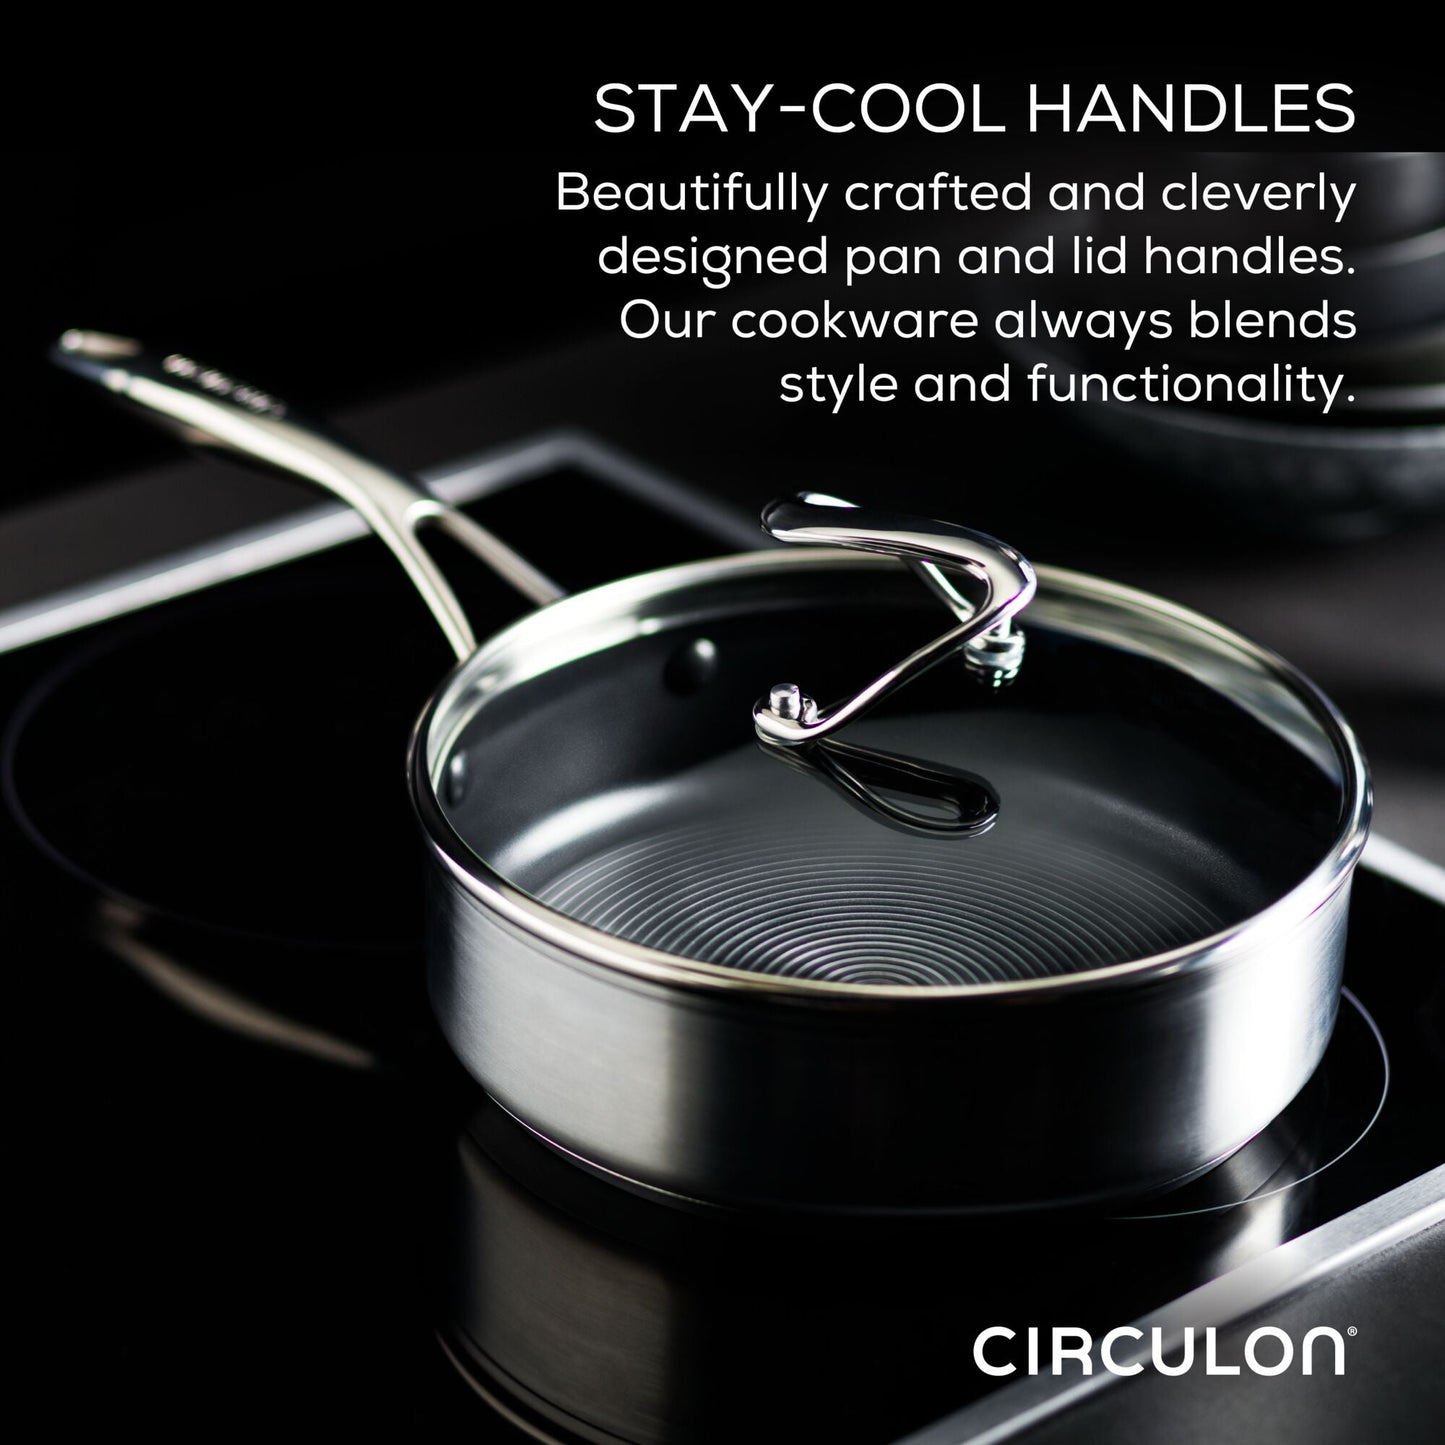 Circulon S-Series Nonstick Stainless Steel Induction Frypan 28cm